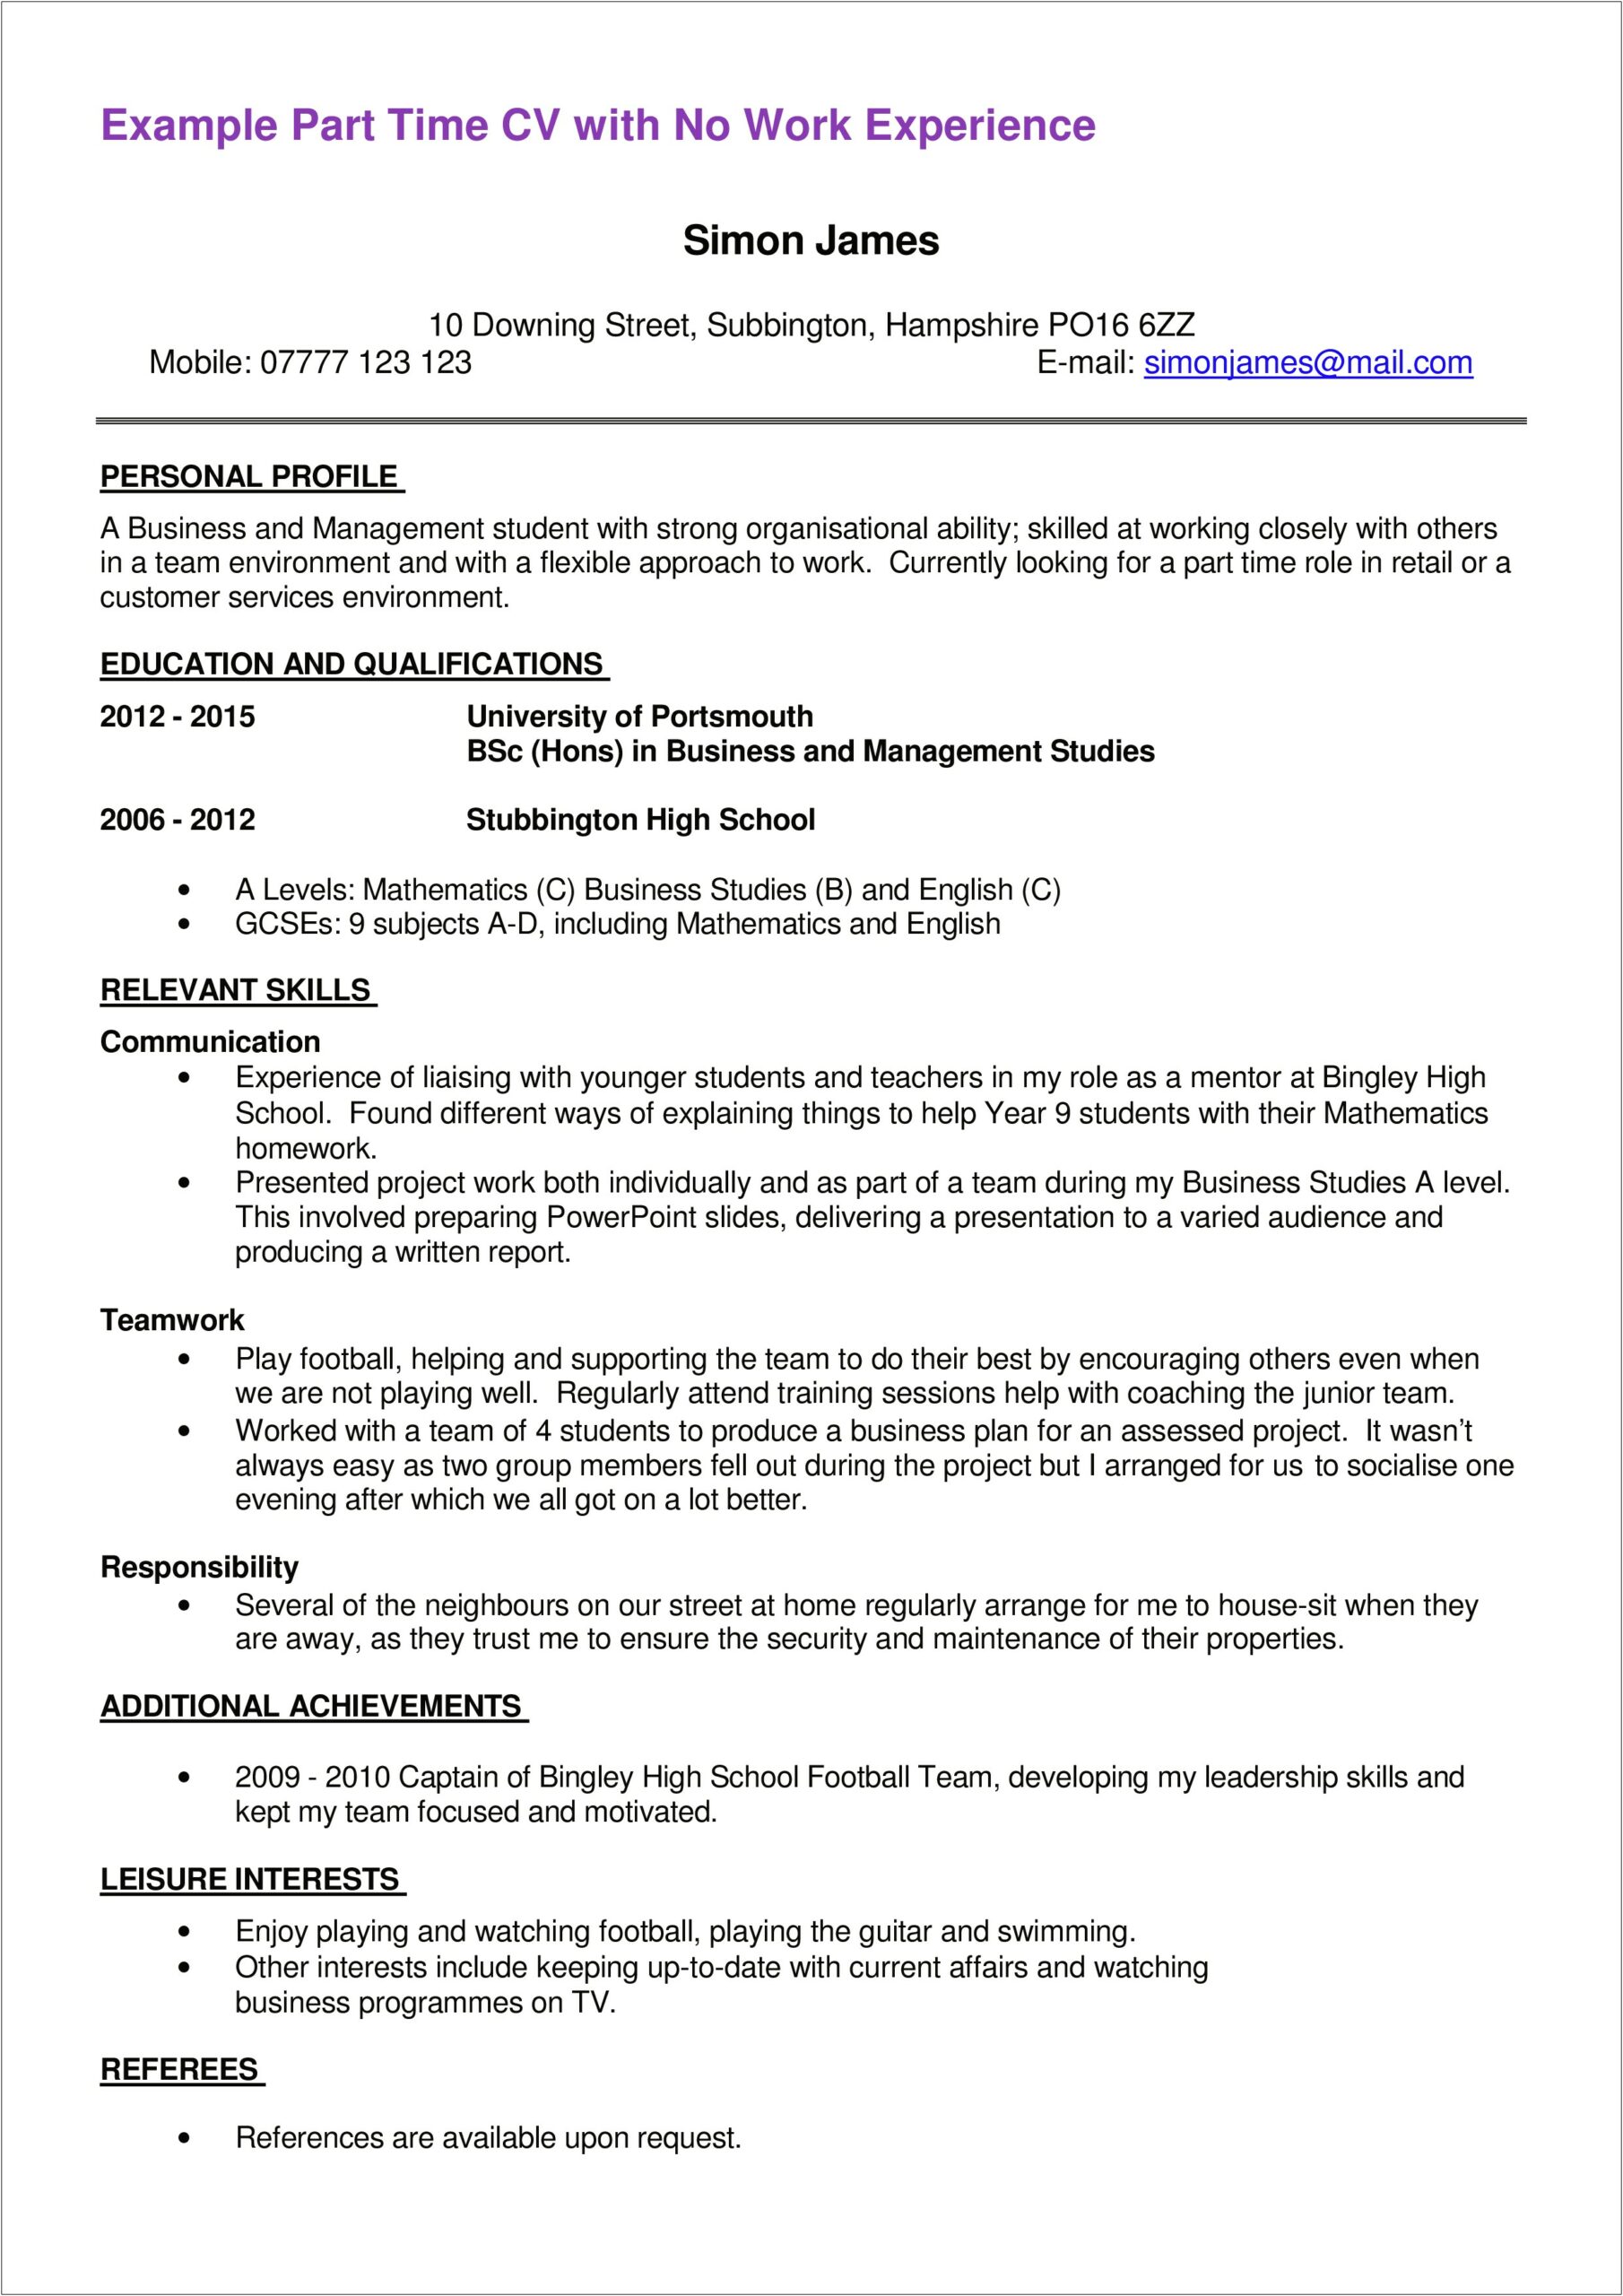 Resumes For Retirees Looking For Part Time Work